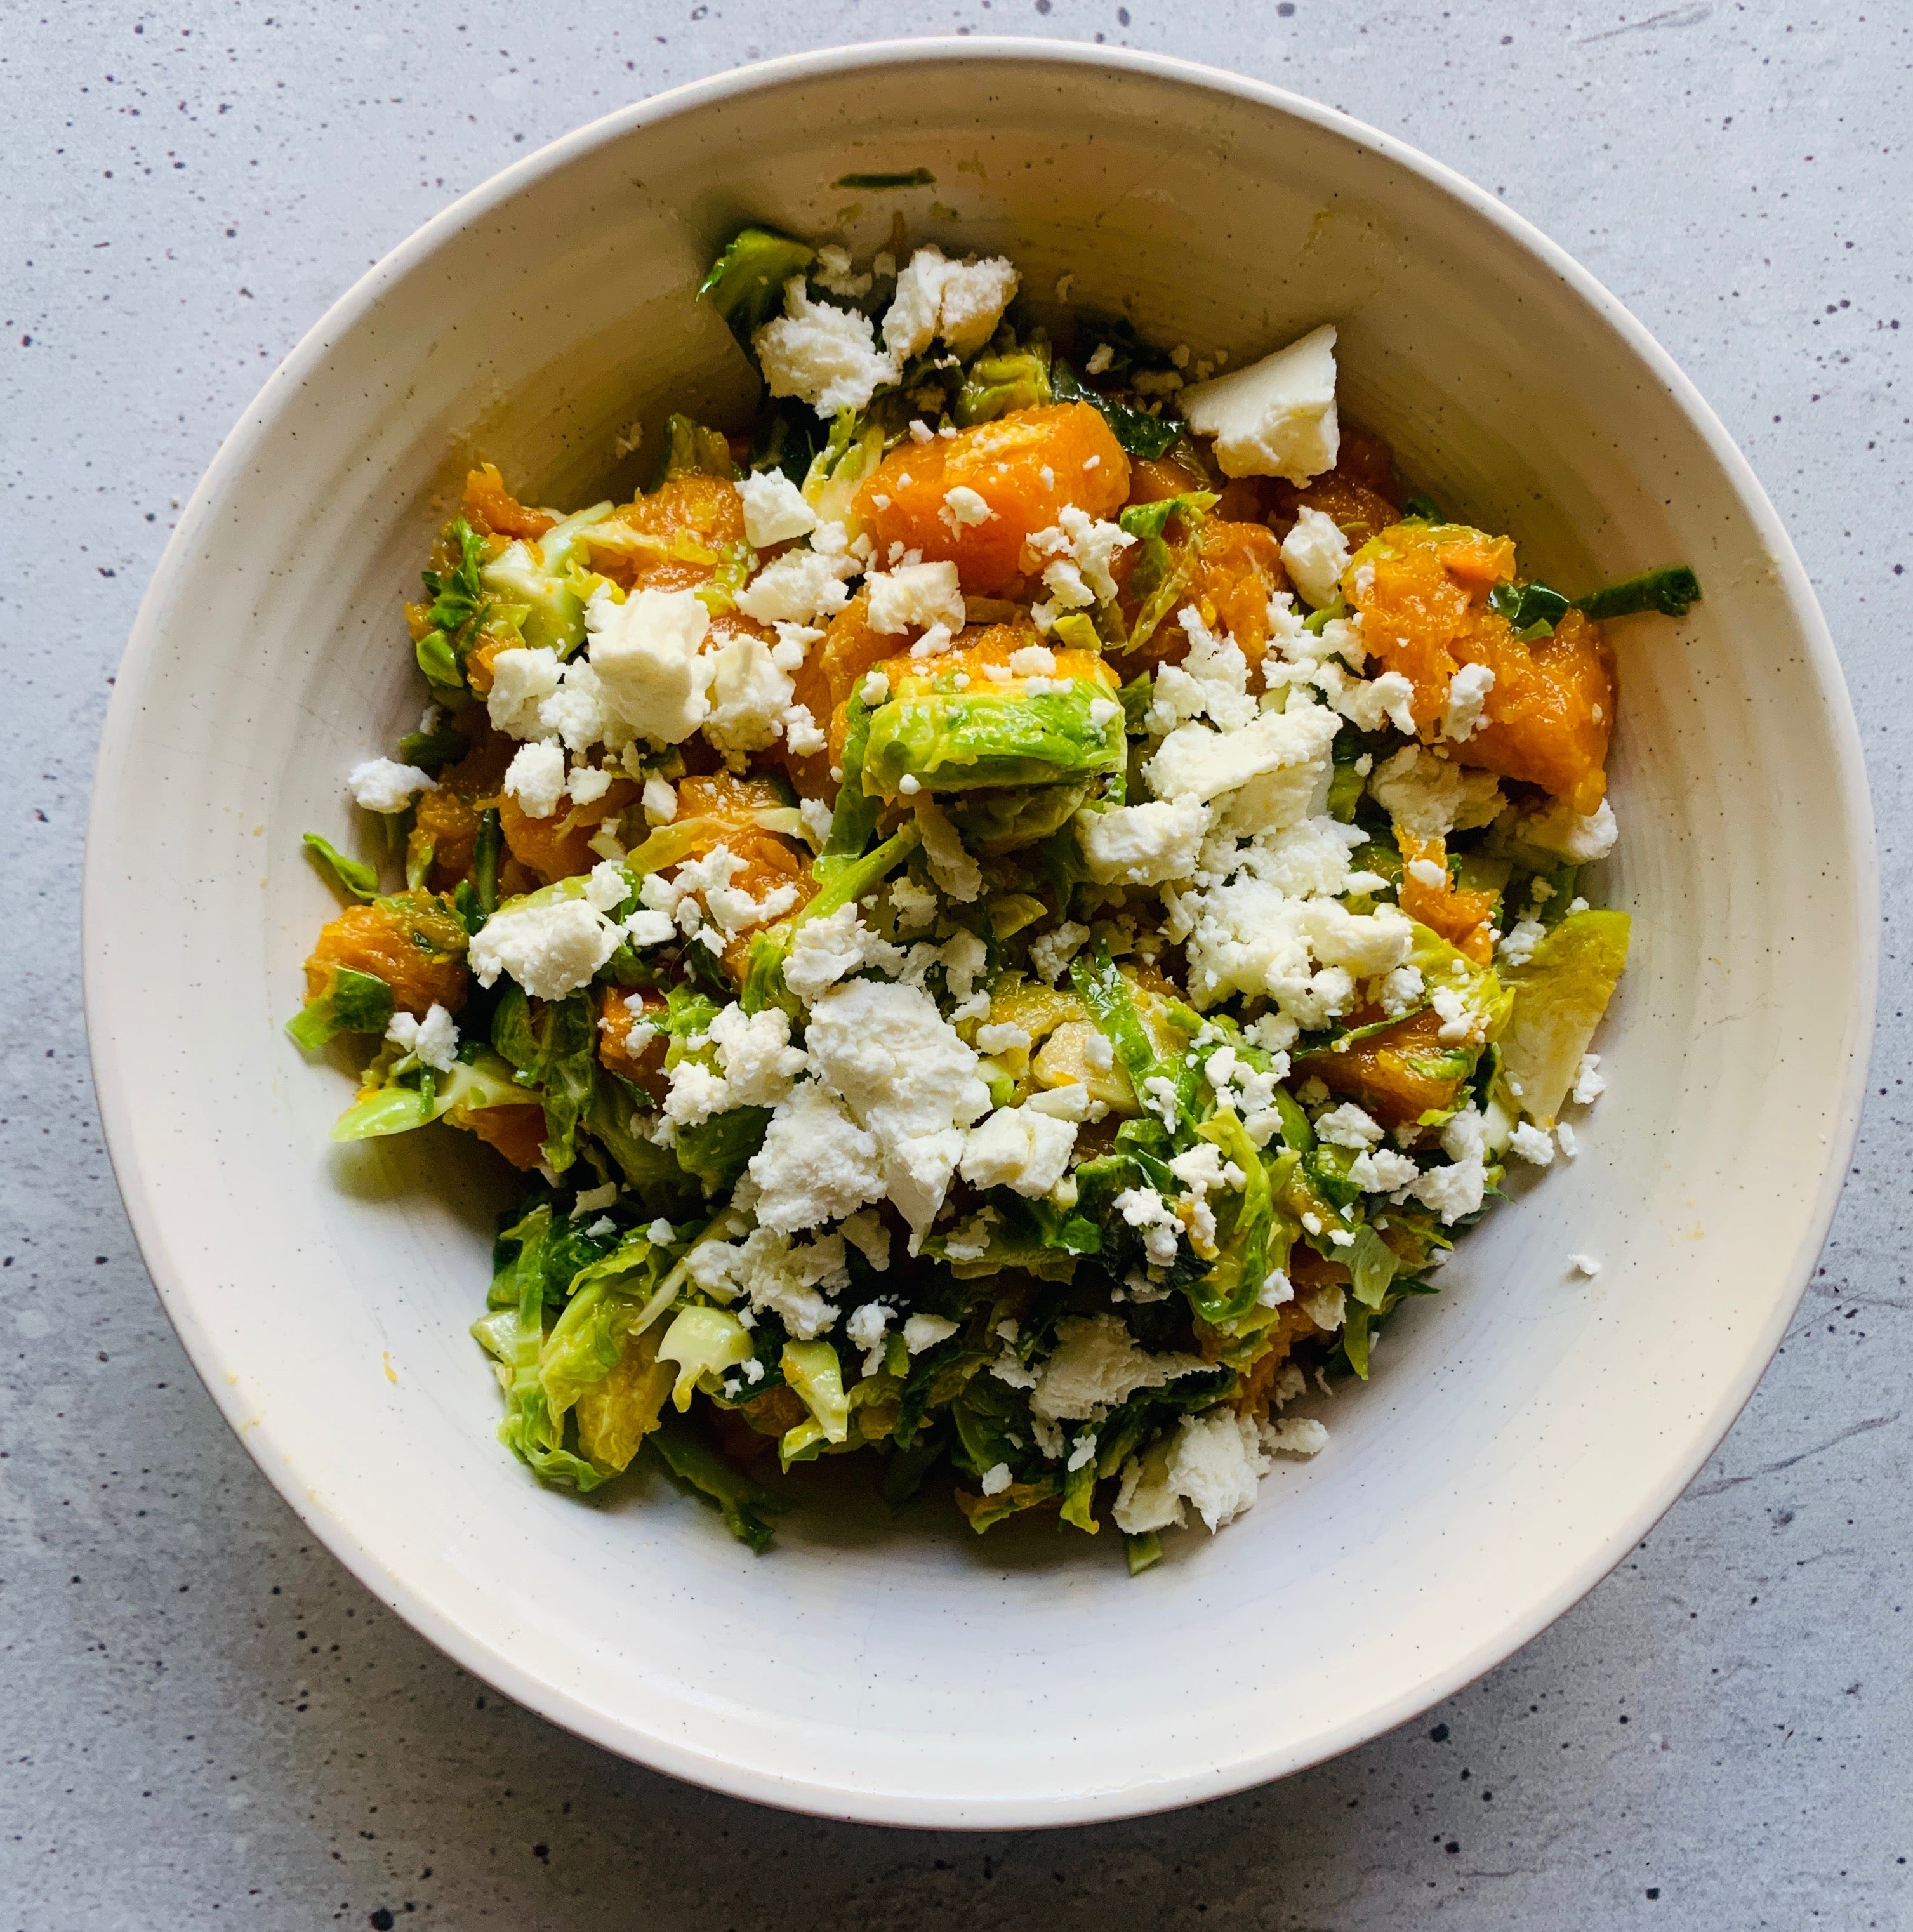 Photo of Butternut Squash and Brussels sprout salad in a white bowl, sprinkled with feta cheese.